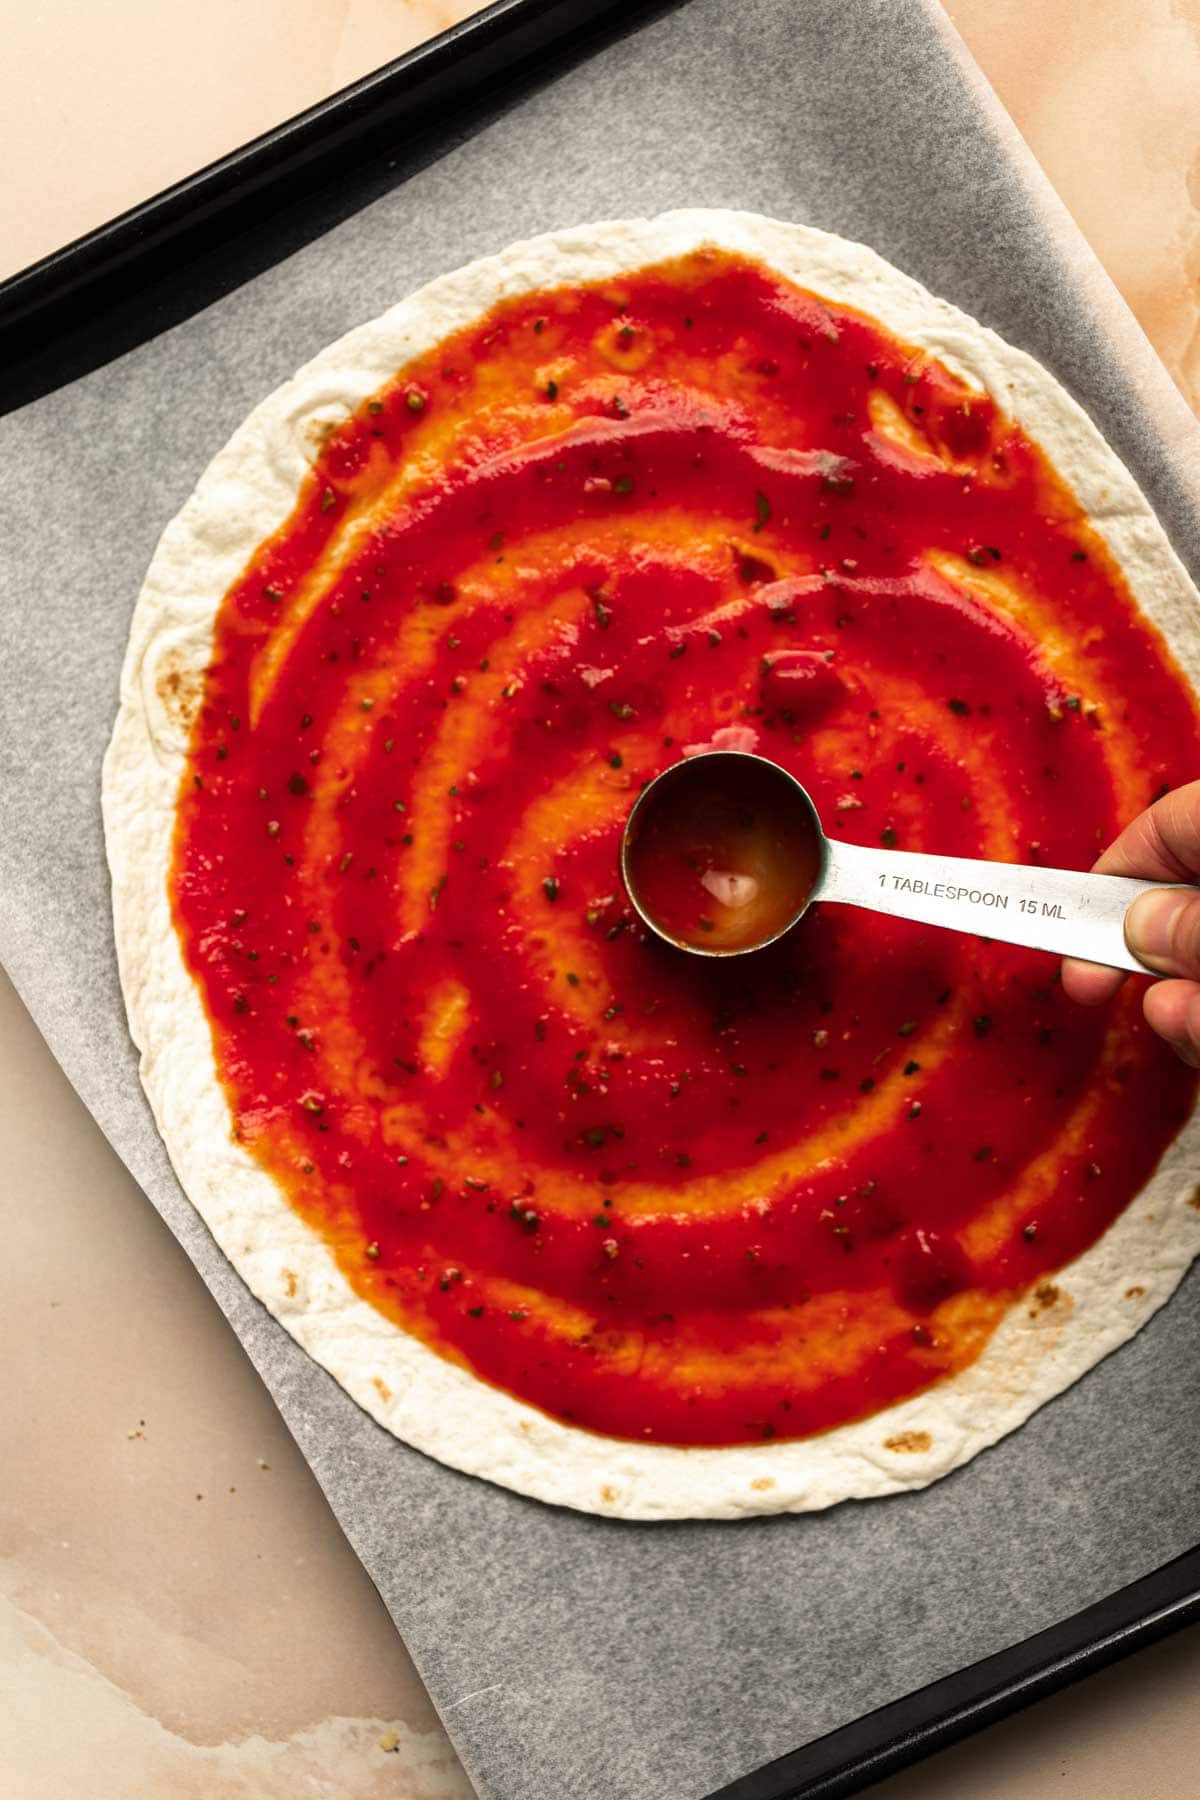 Tomato sauce being spread out on a tortilla pizza.